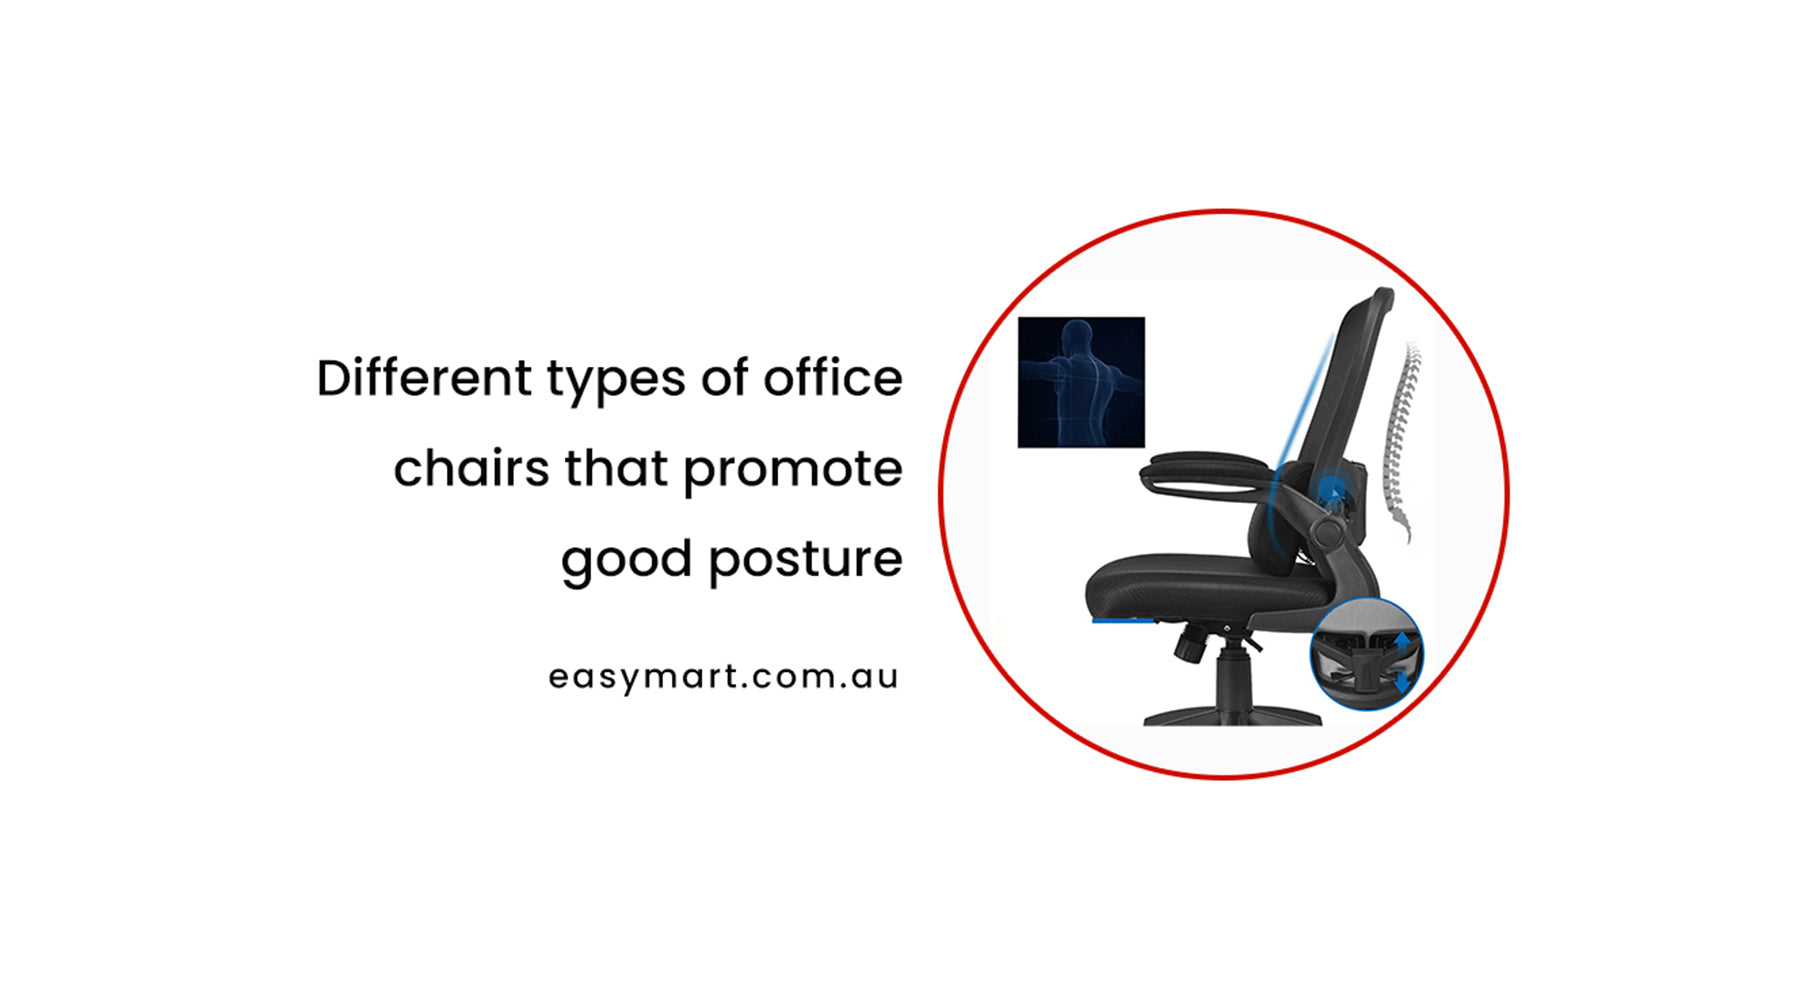 Different types of office chairs that promote good posture